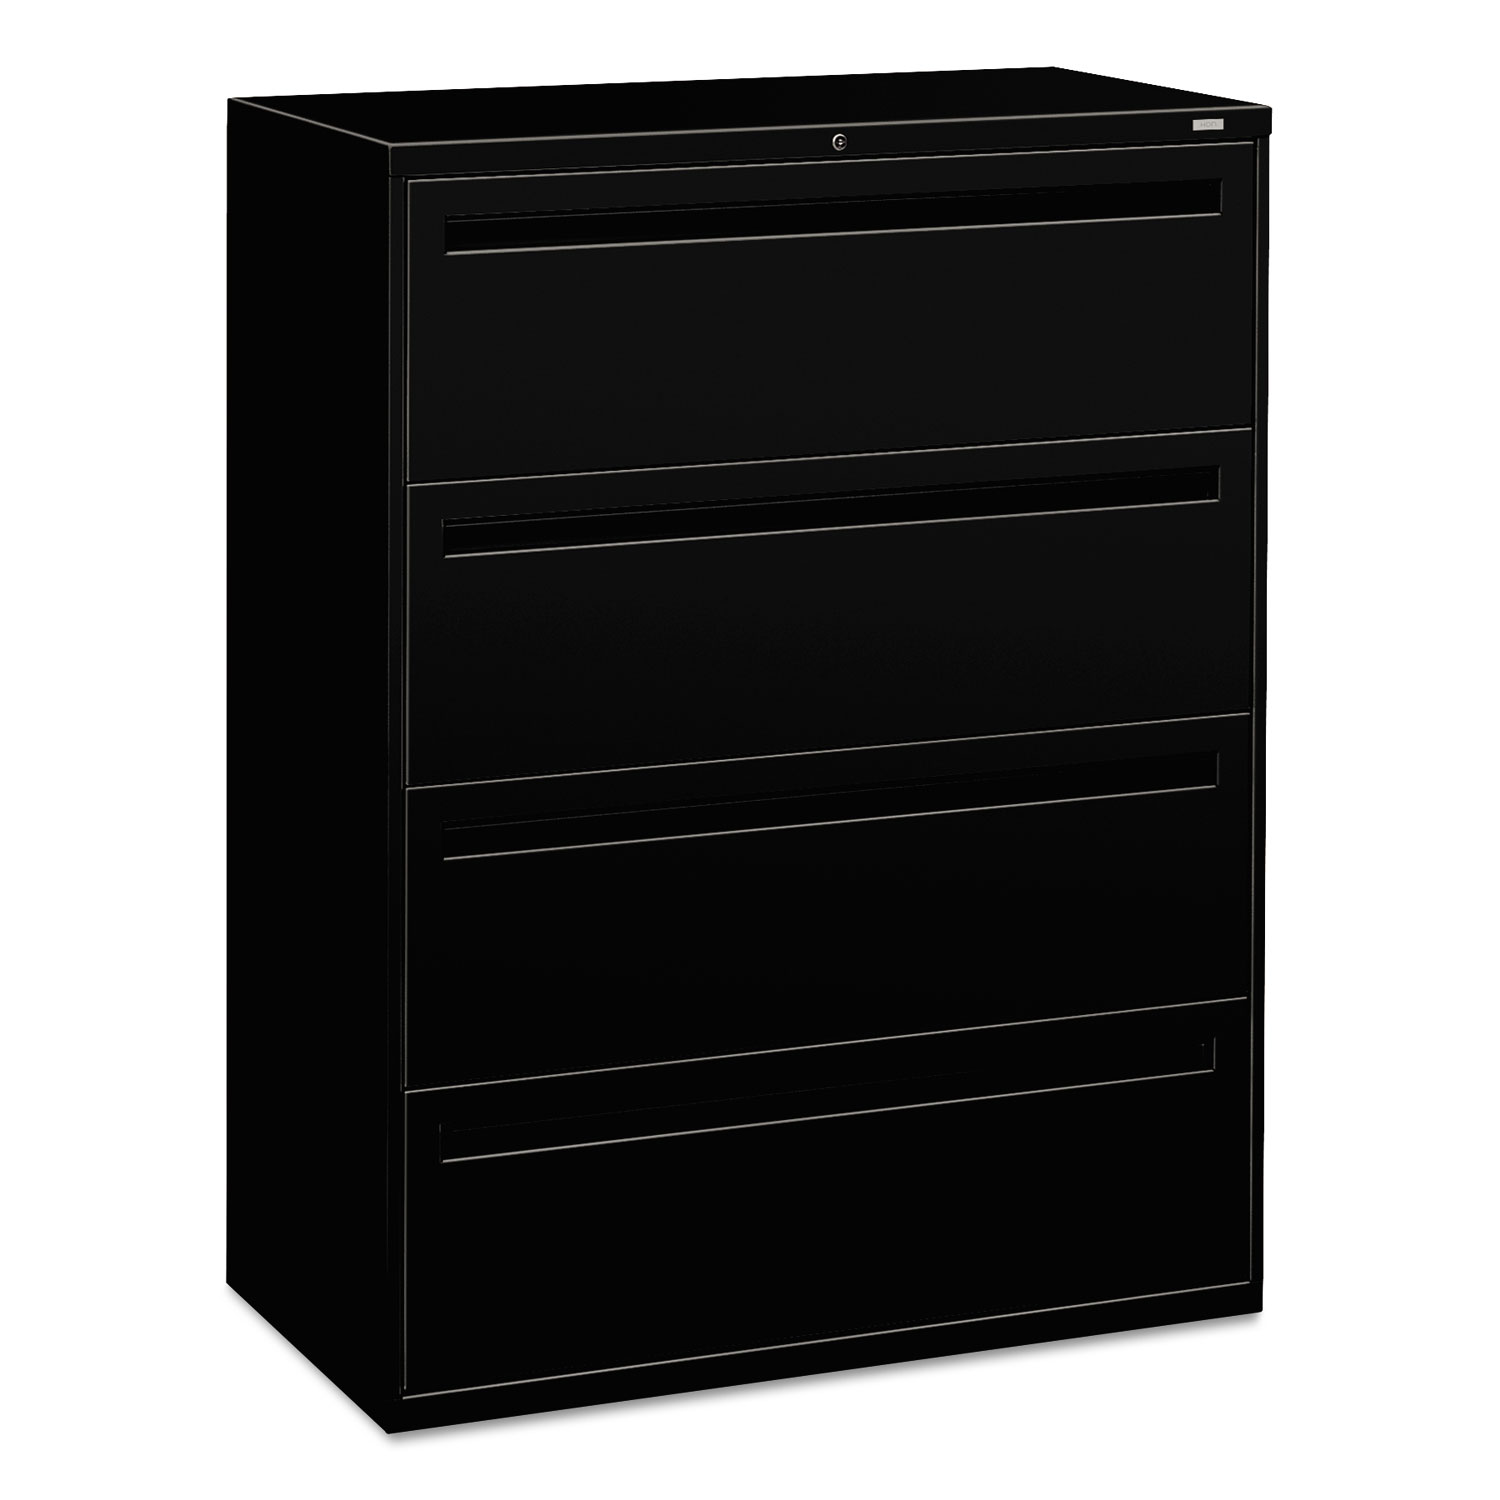 700 Series Four-Drawer Lateral File, 42w x 19-1/4d, Black